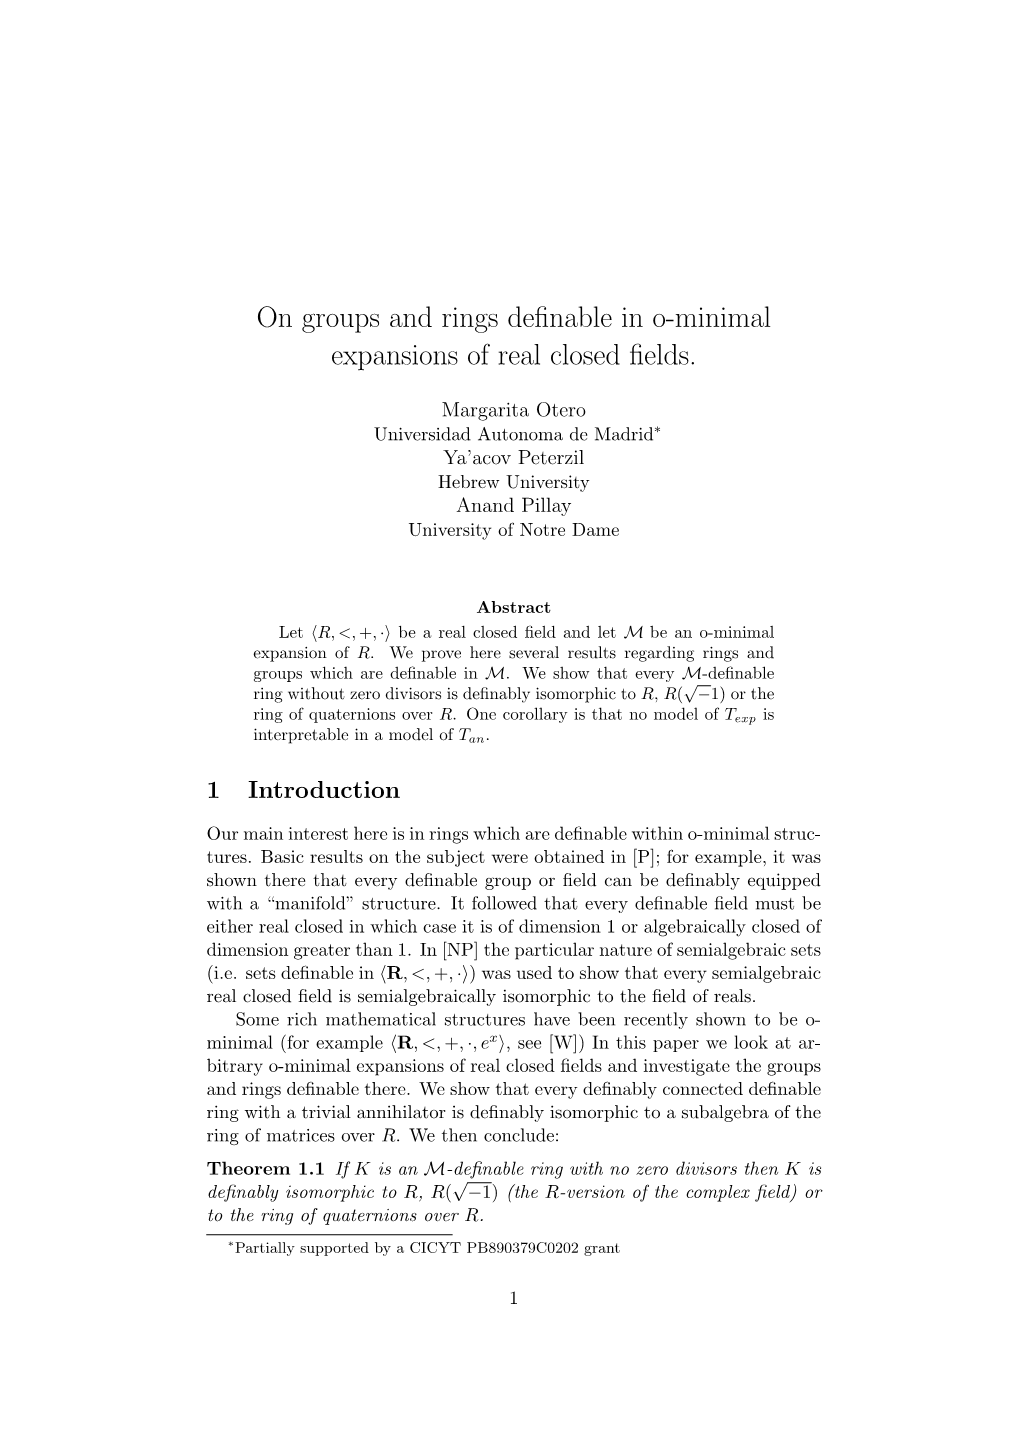 On Groups and Rings Definable in O-Minimal Expansions of Real